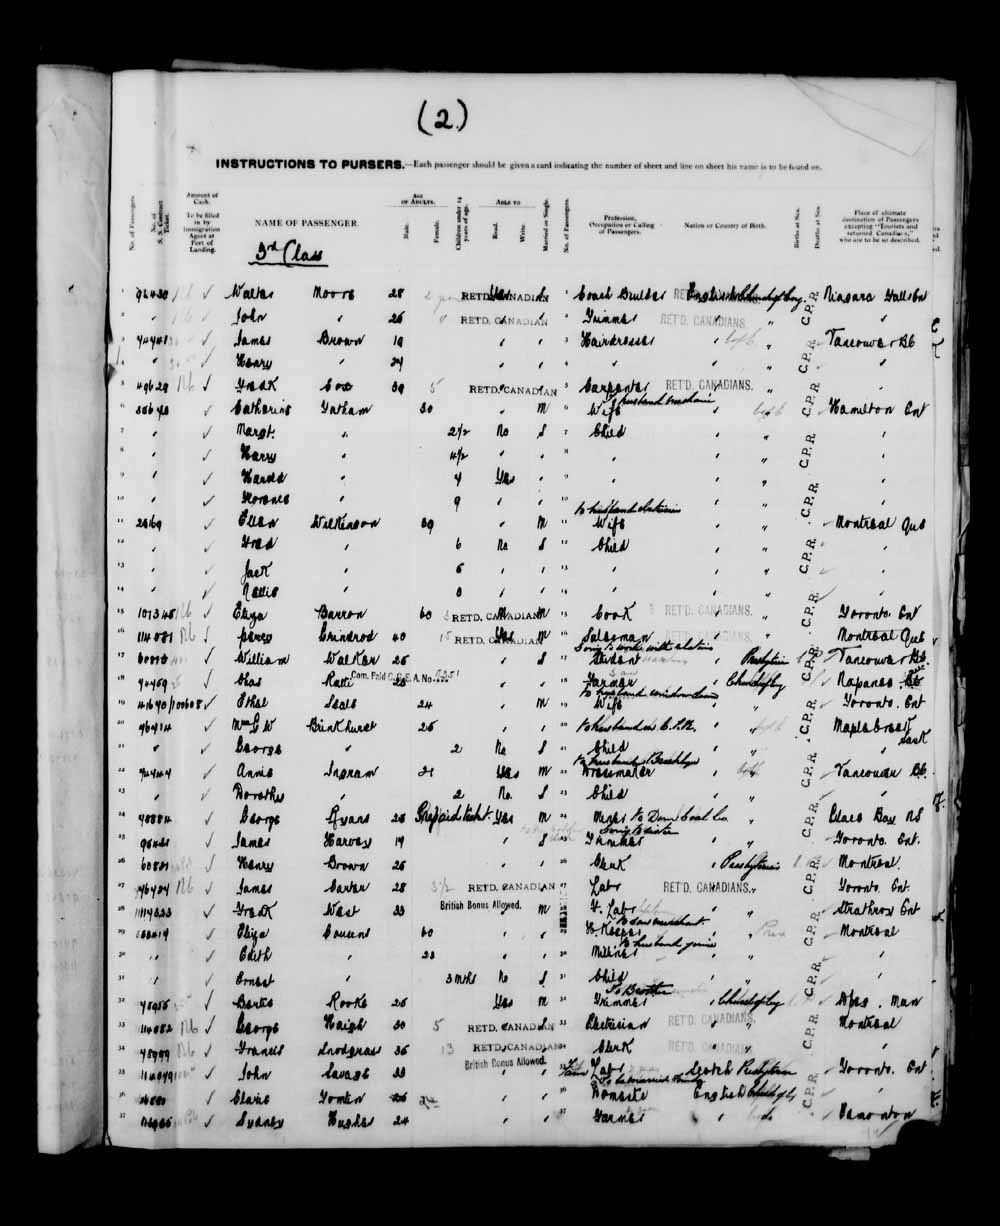 Digitized page of Quebec Passenger Lists for Image No.: e003591252